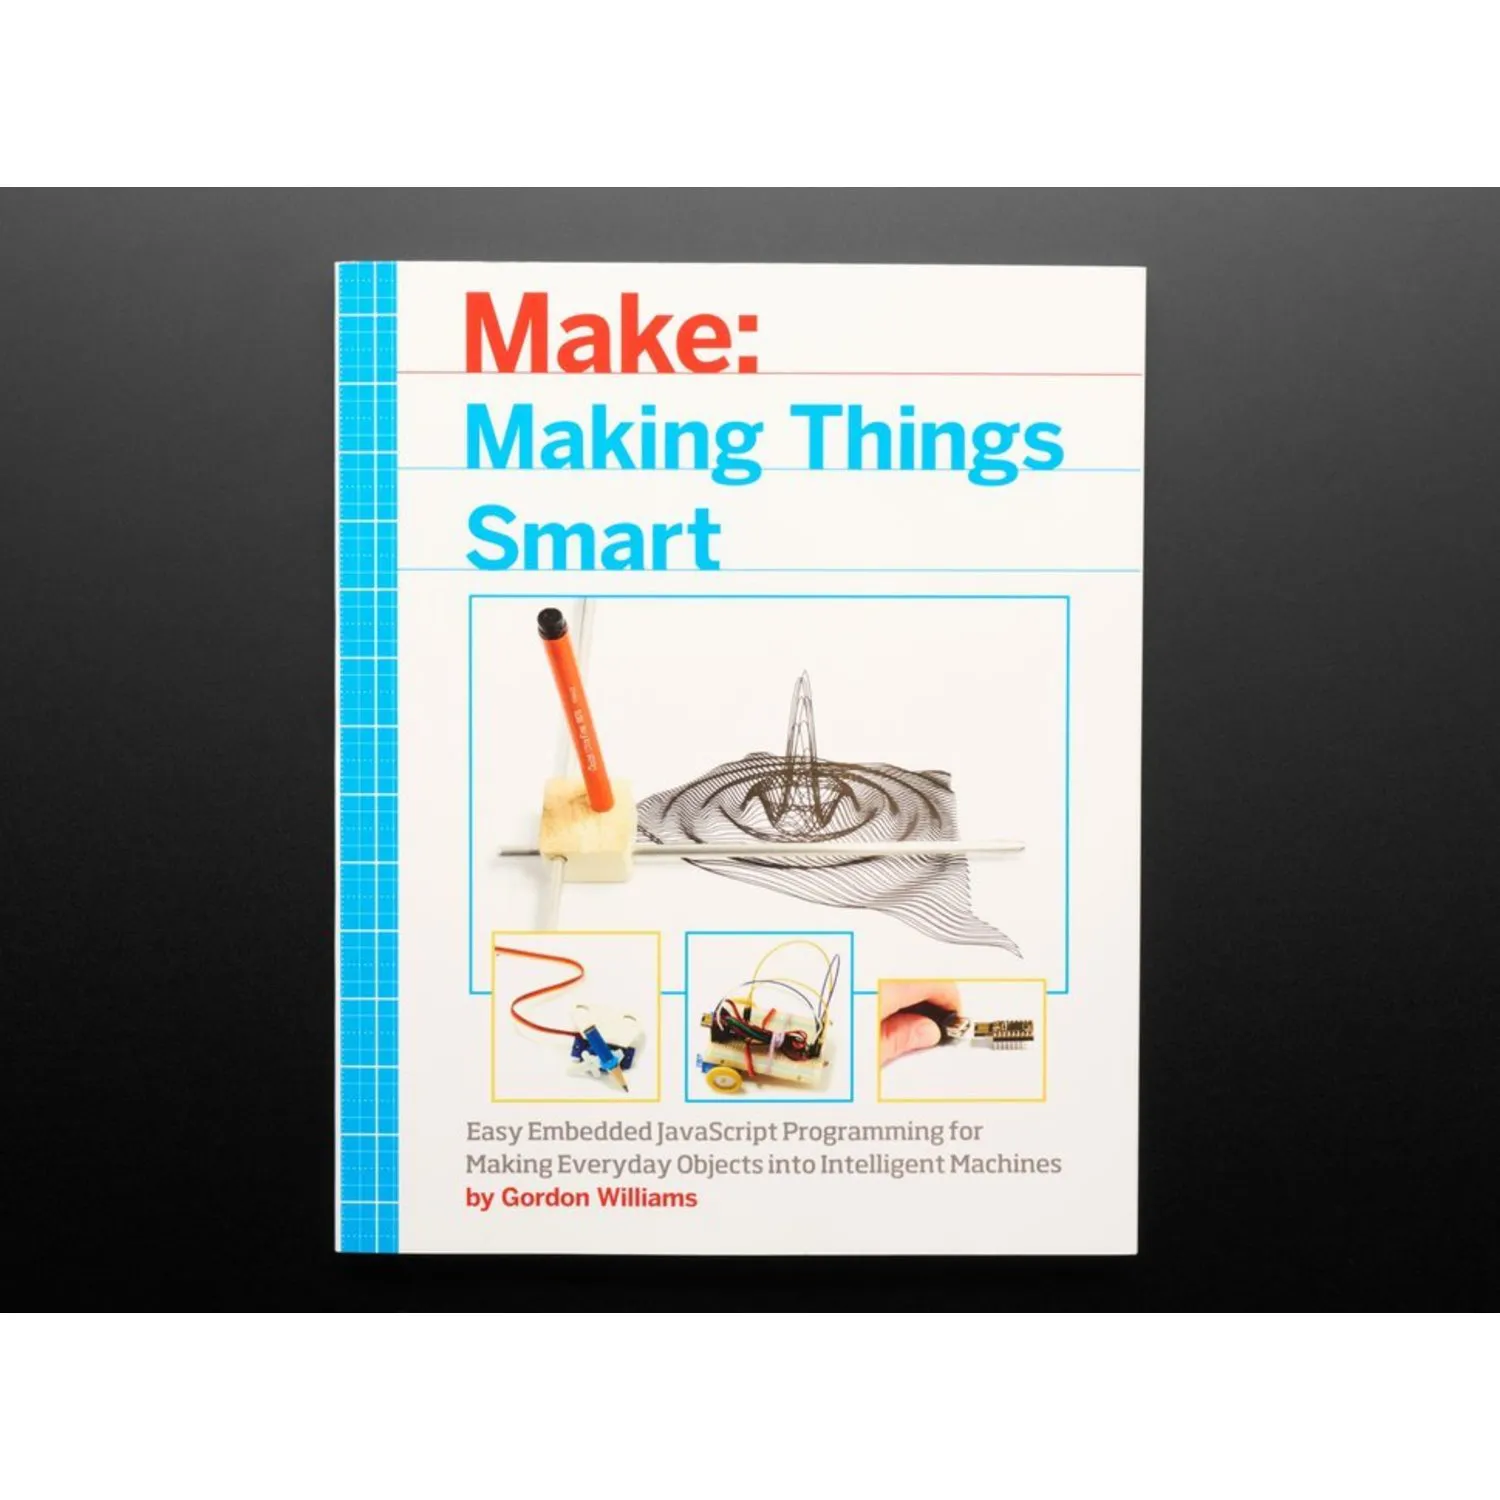 Photo of Making Things Smart - JavaScript for Microcontrollers - by Gordon Williams